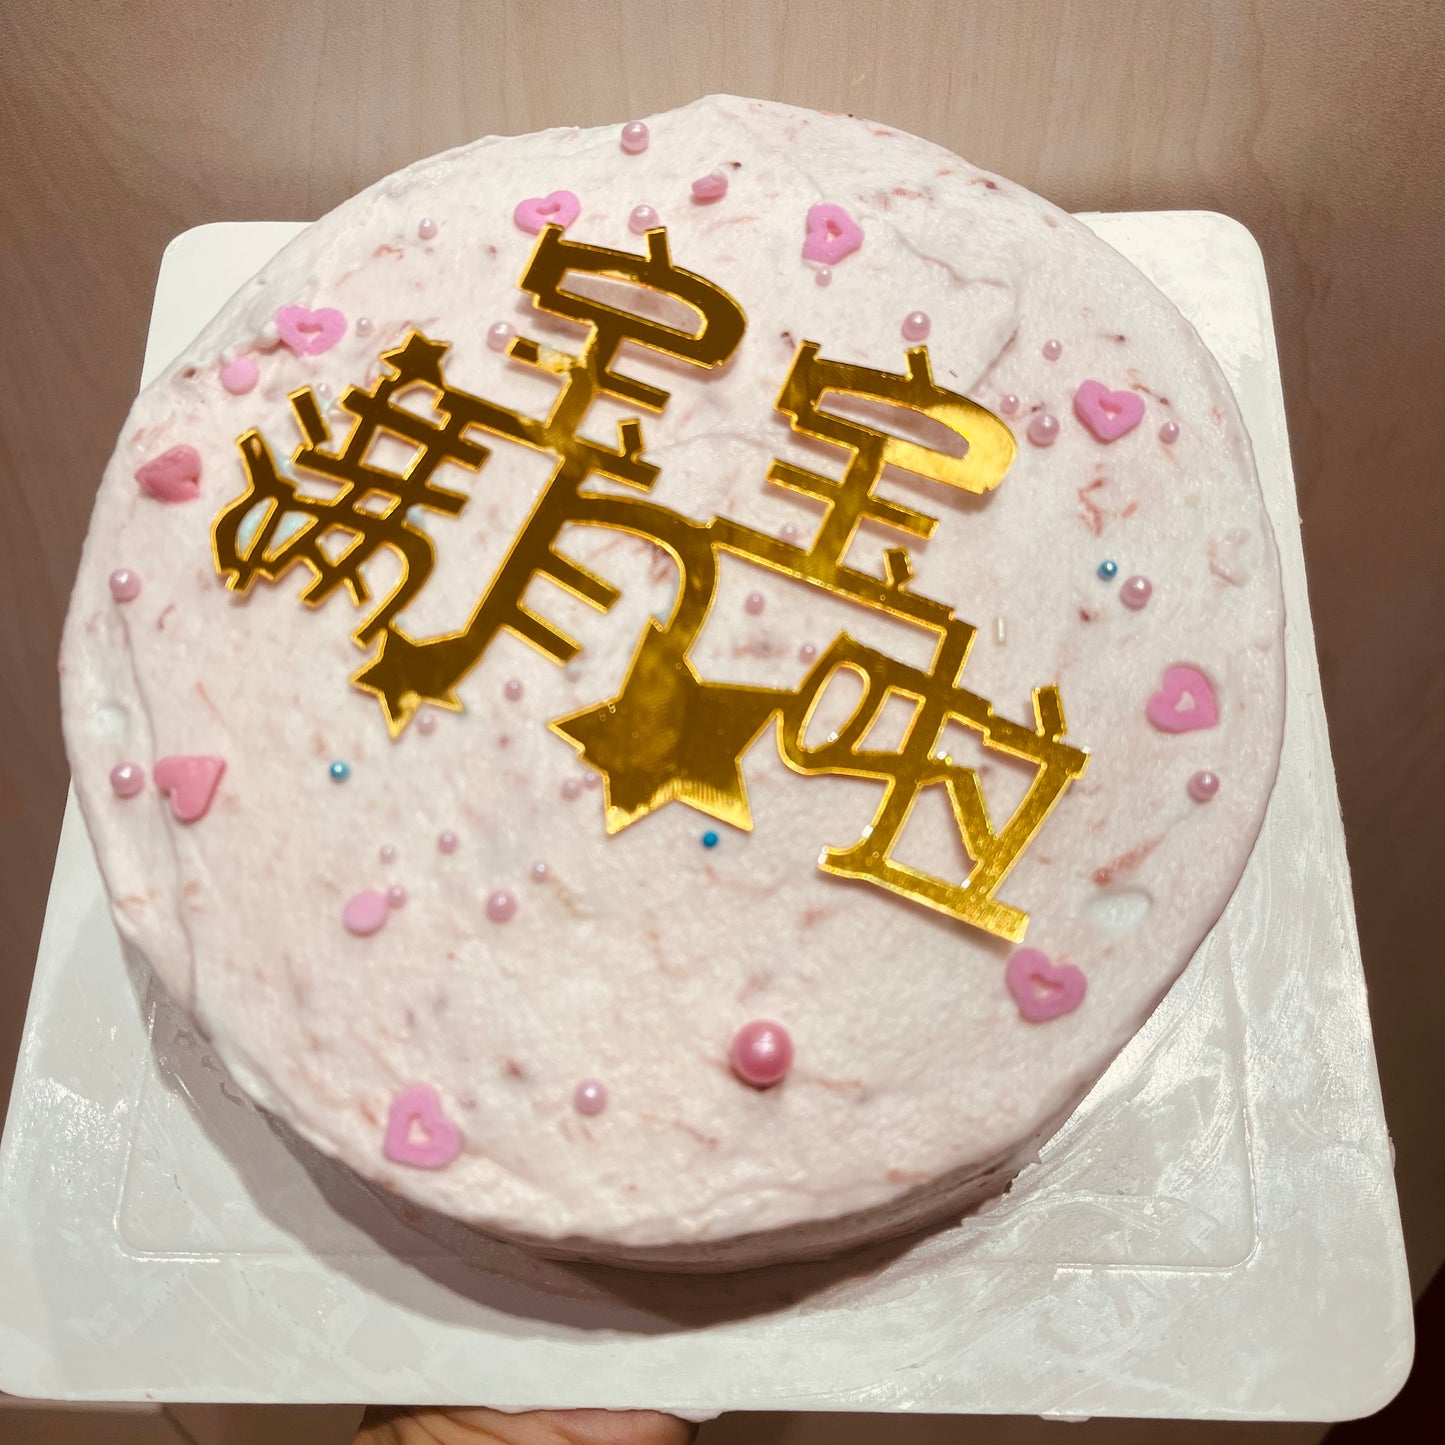 4"/ 5" Celebratory Cakes as Gift. Baby shower 满月cakes, gifts, anniversary